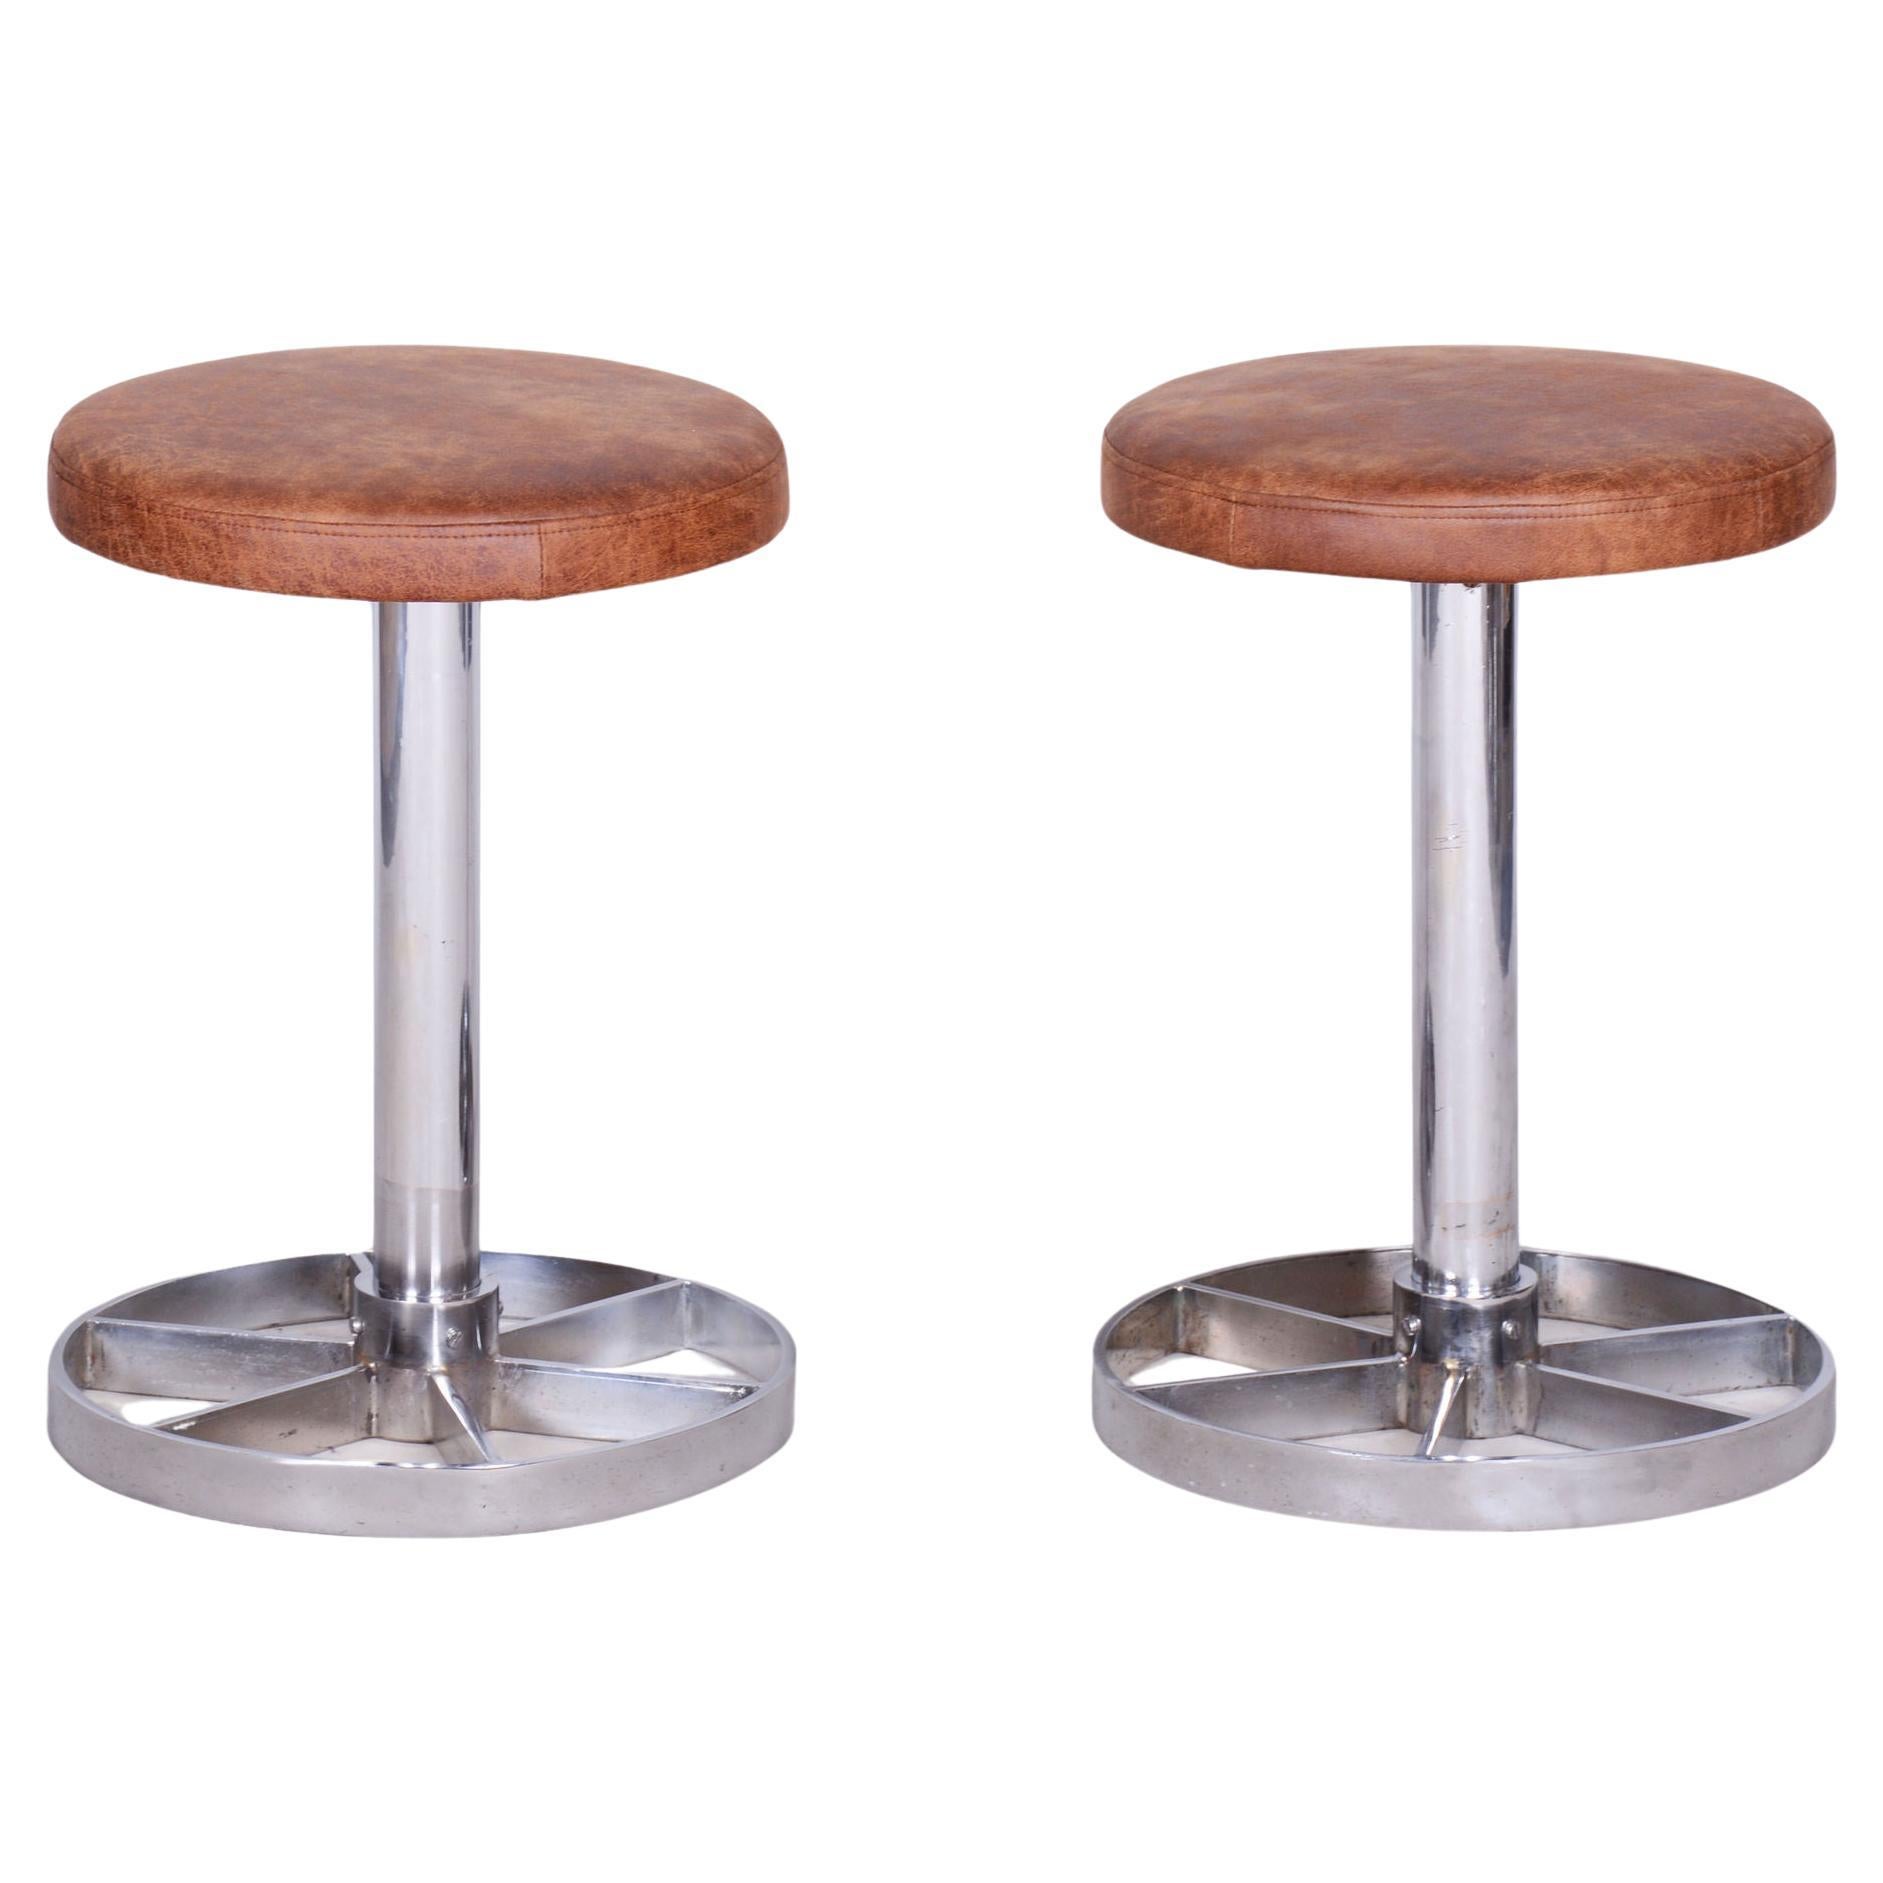 Pair of Bauhaus Chrome-Plated Steel Stools, Brown Leather, Czech, 1930-1939 For Sale